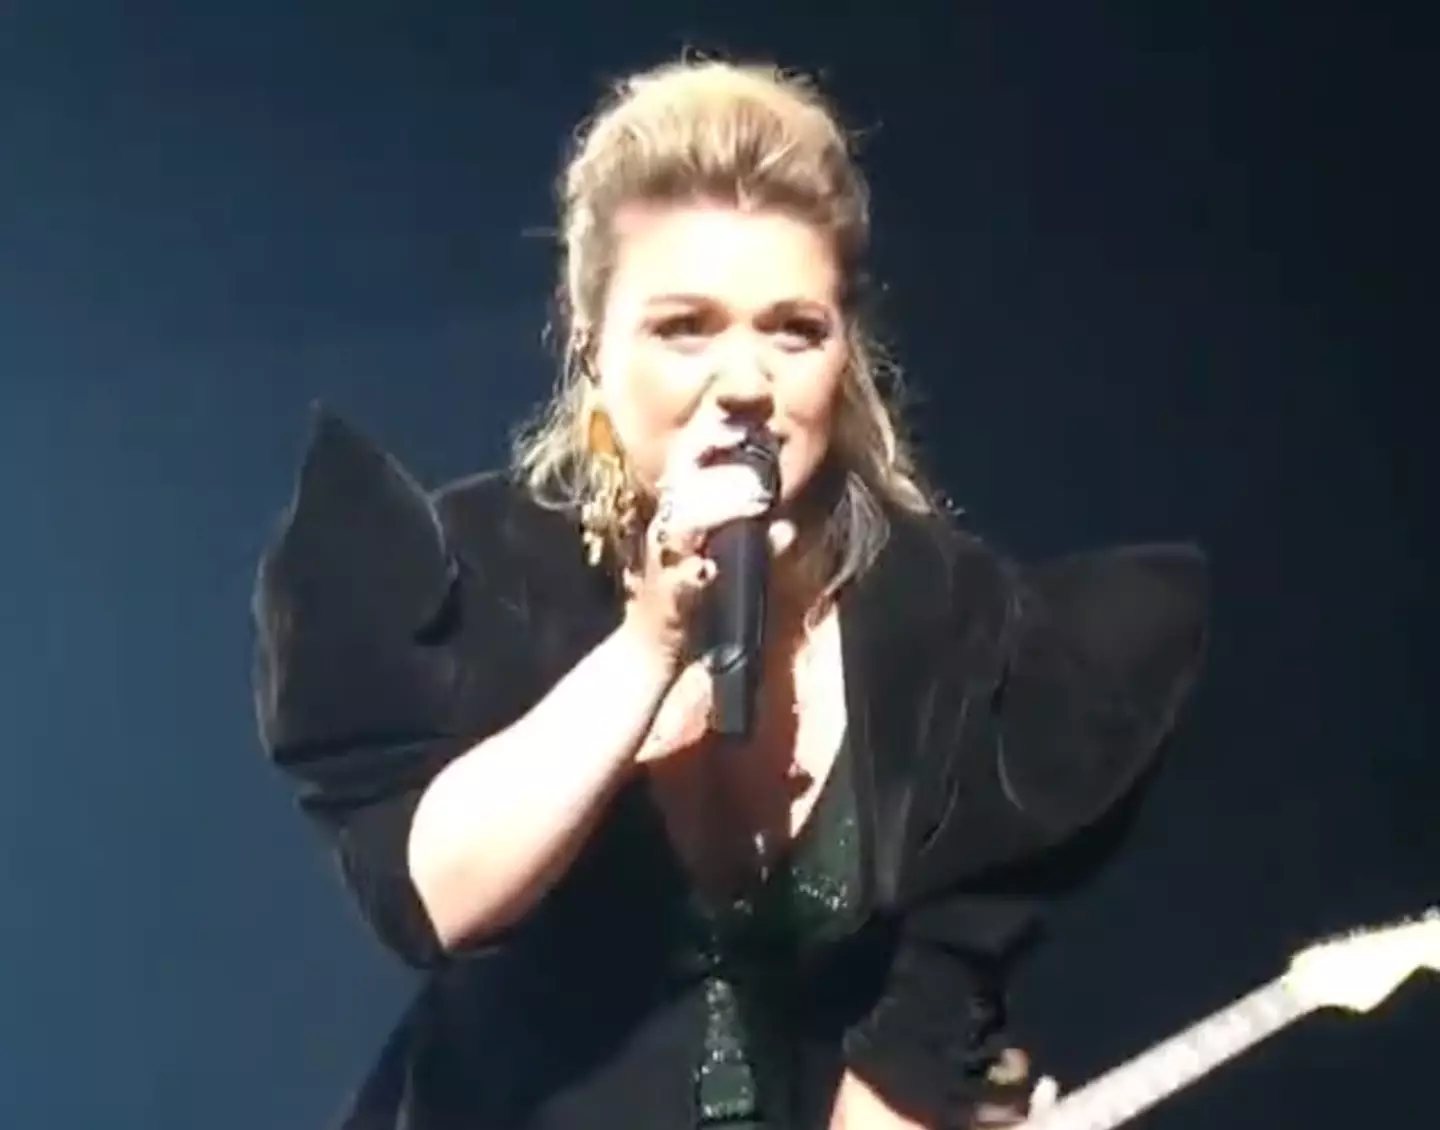 Kelly Clarkson spotted the sign during her Las Vegas residency.